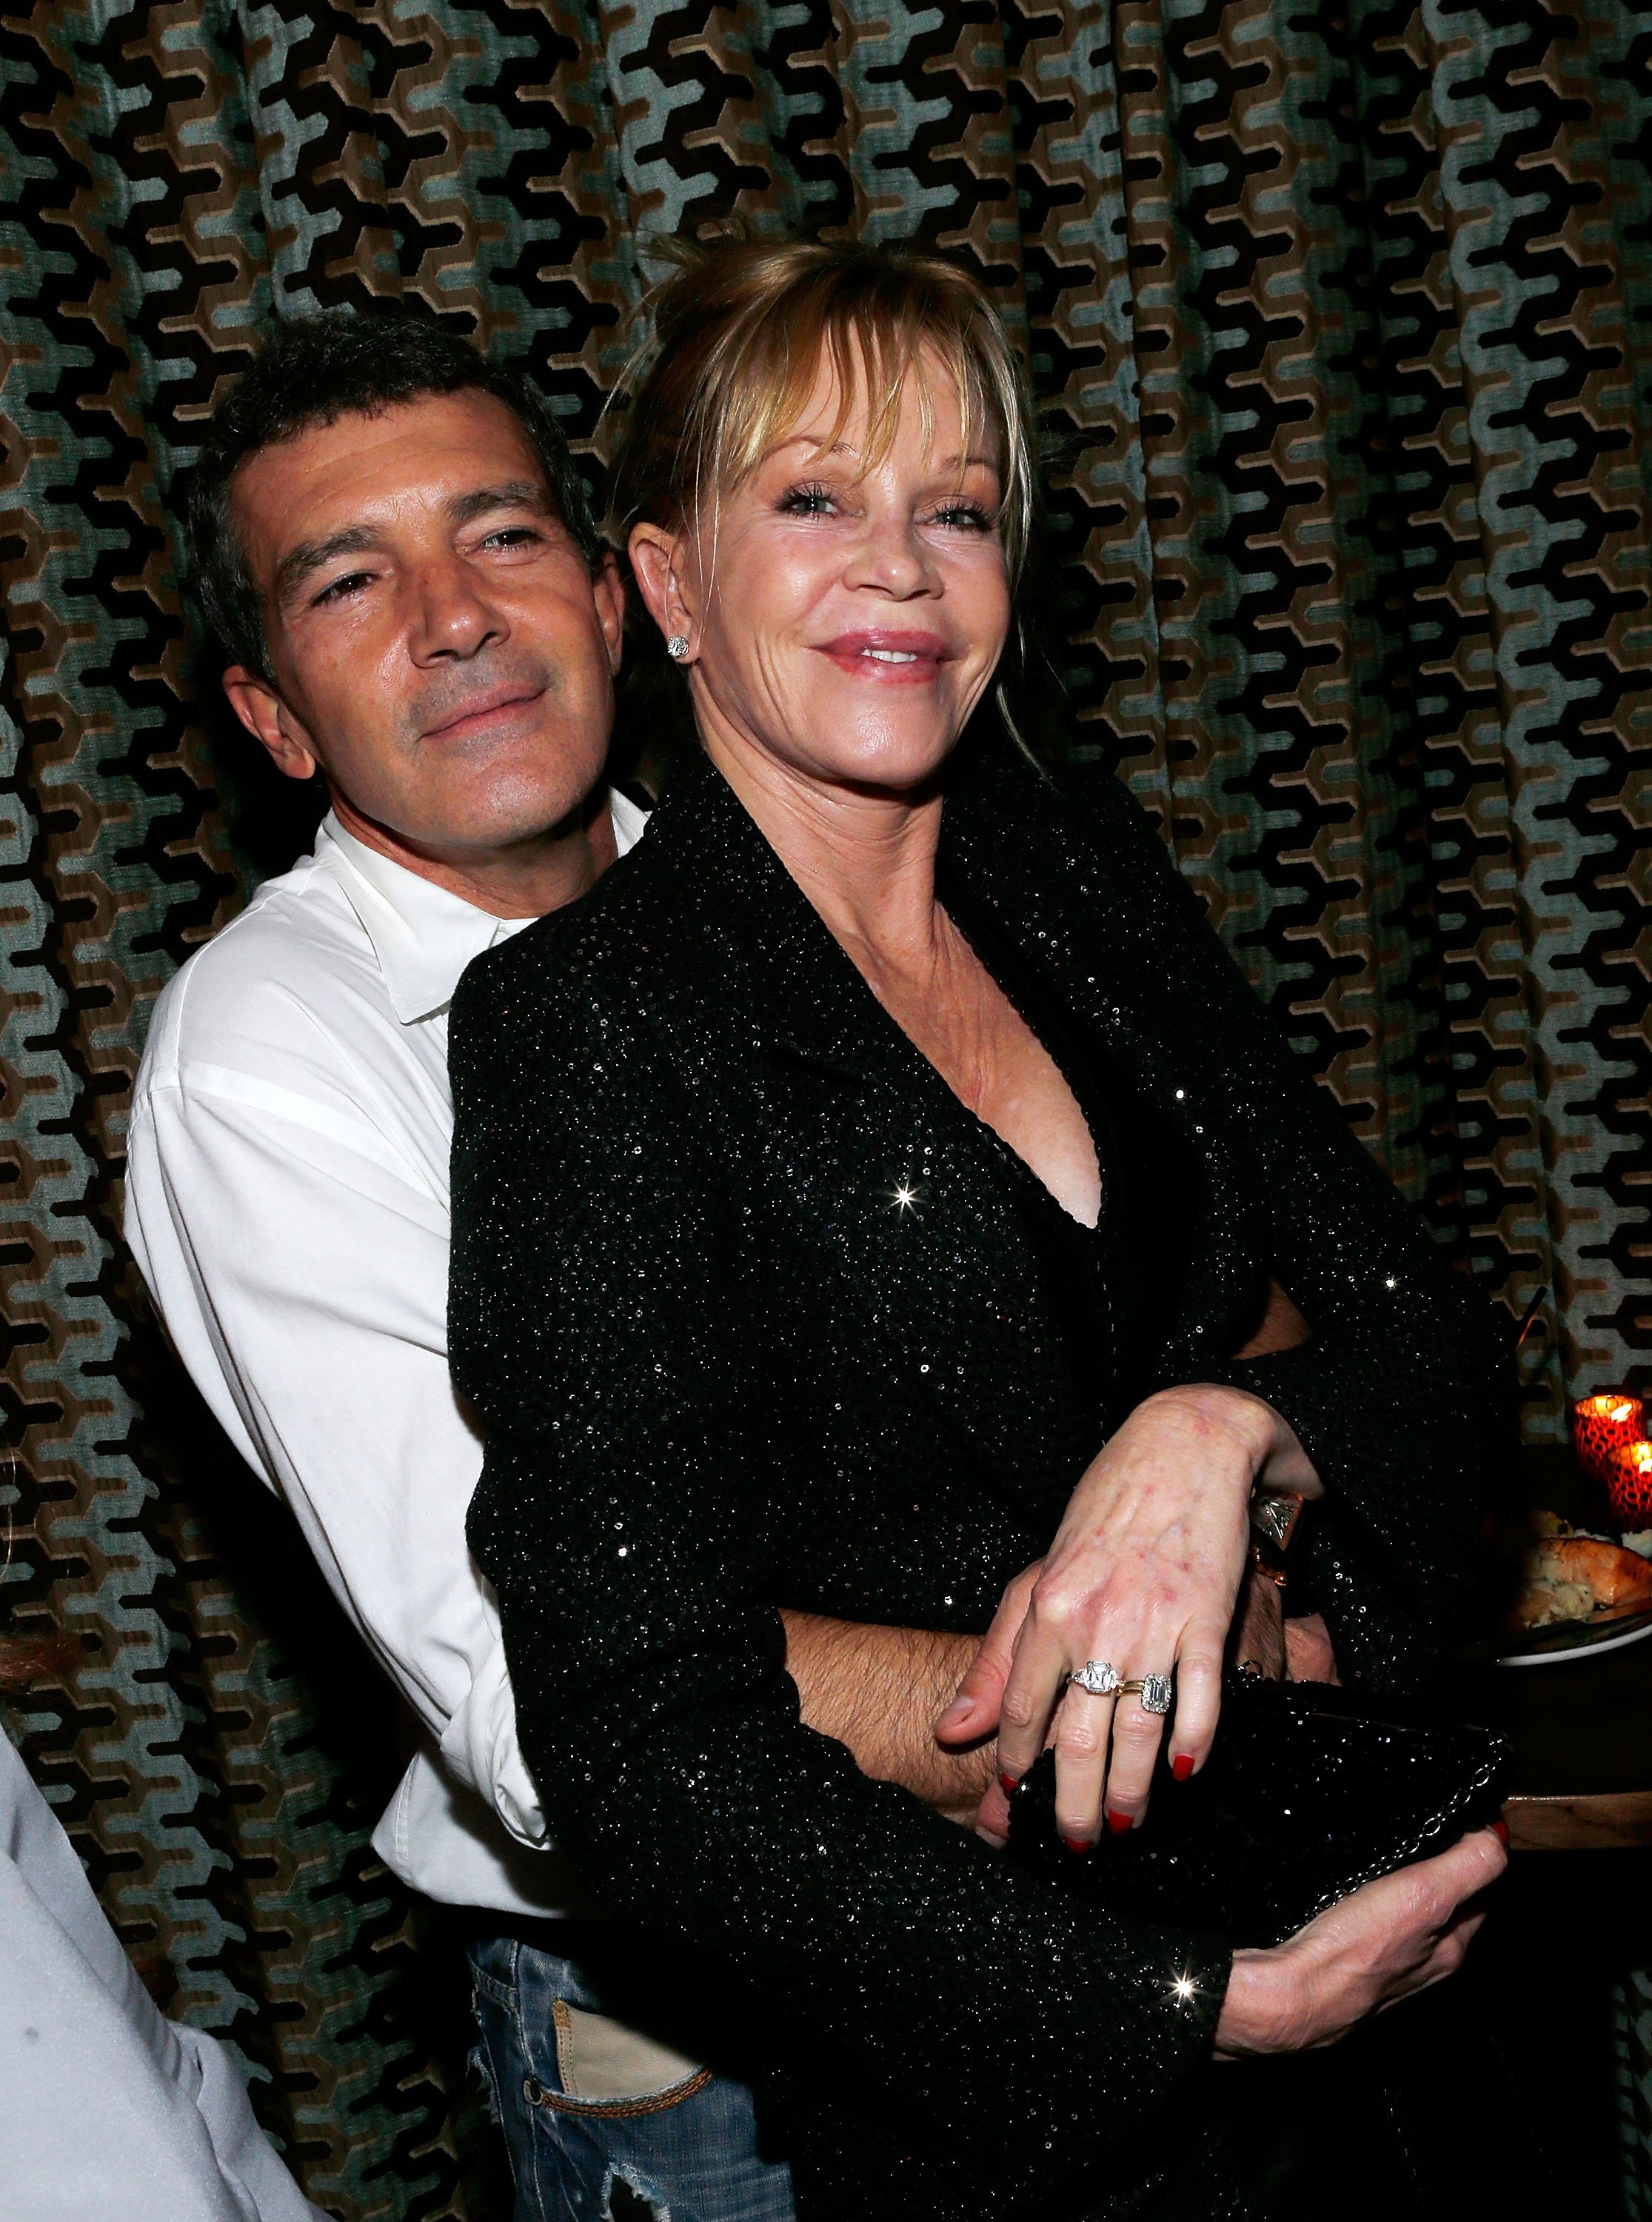 Actor Antonio Banderas and actress Melanie Griffith attend the after party for the "Black Nativity" premiere at The Red Rooster on November 18, 2013 in New York City | Source: Getty Images